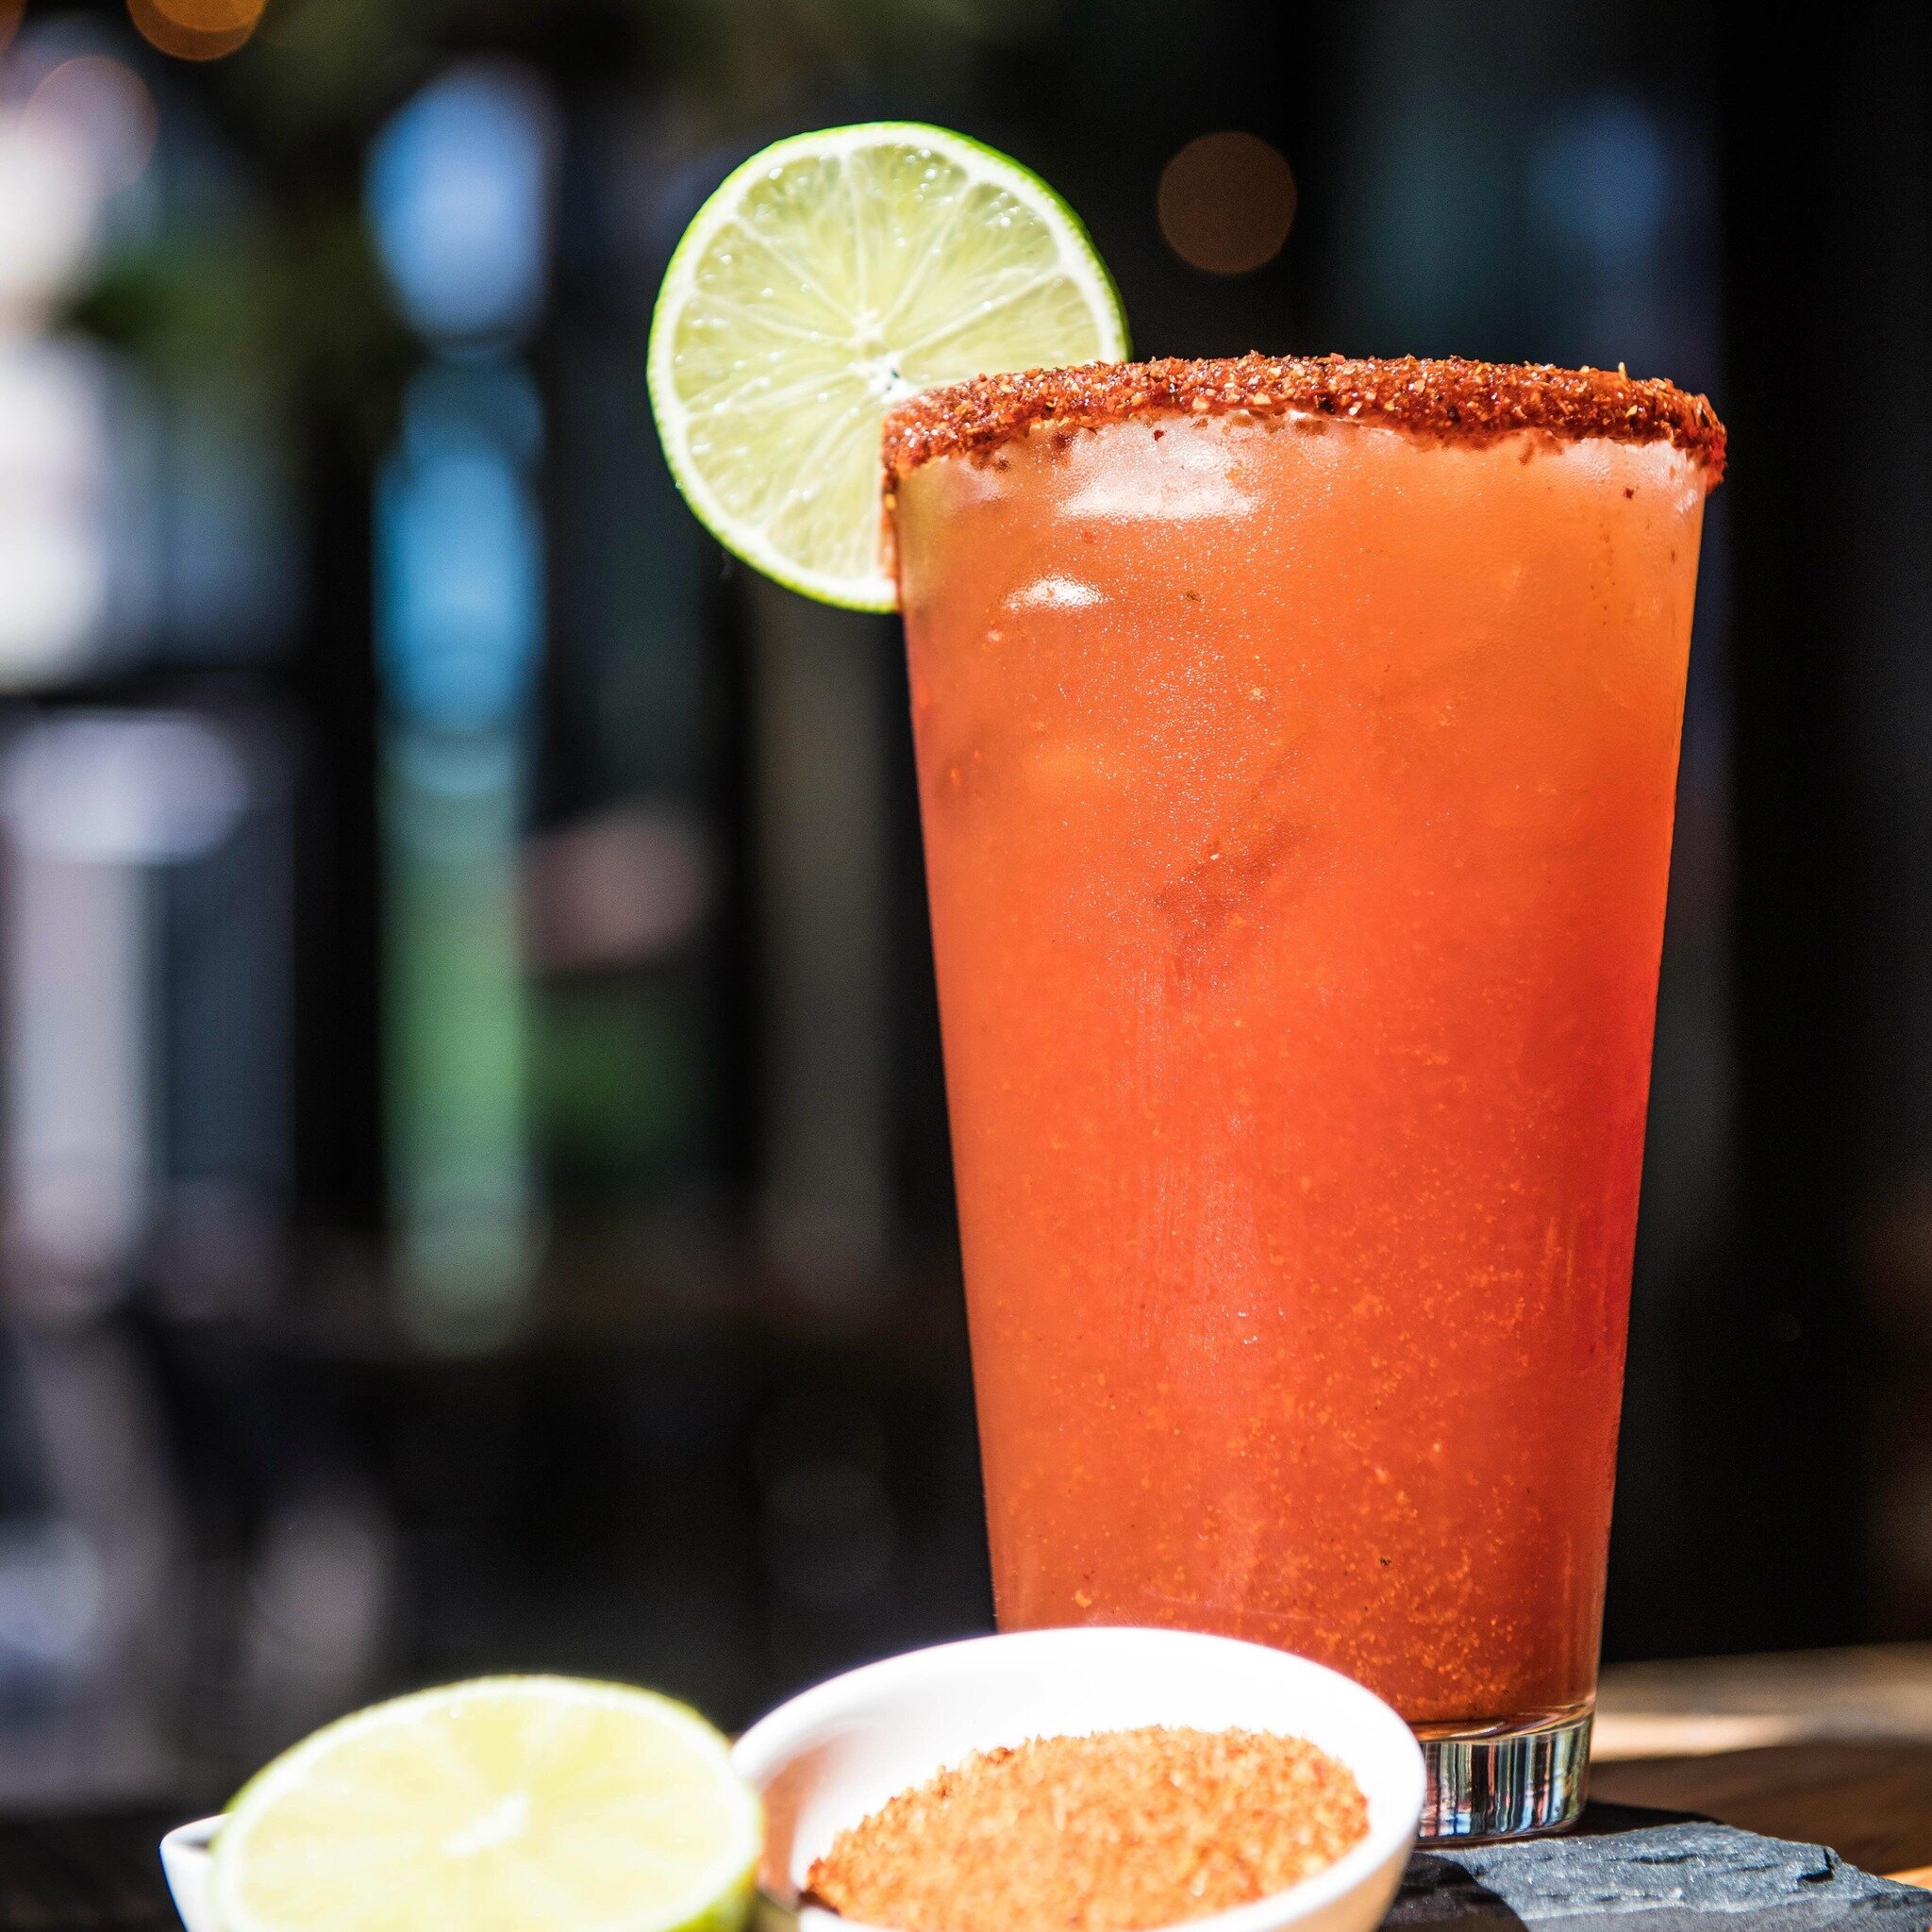 We have got the perfect companion for your day- the ultimate Michelada delight. Spice up your day with a kick! To find your nearest location, visit us online at https://www.Moctezumas.com/.